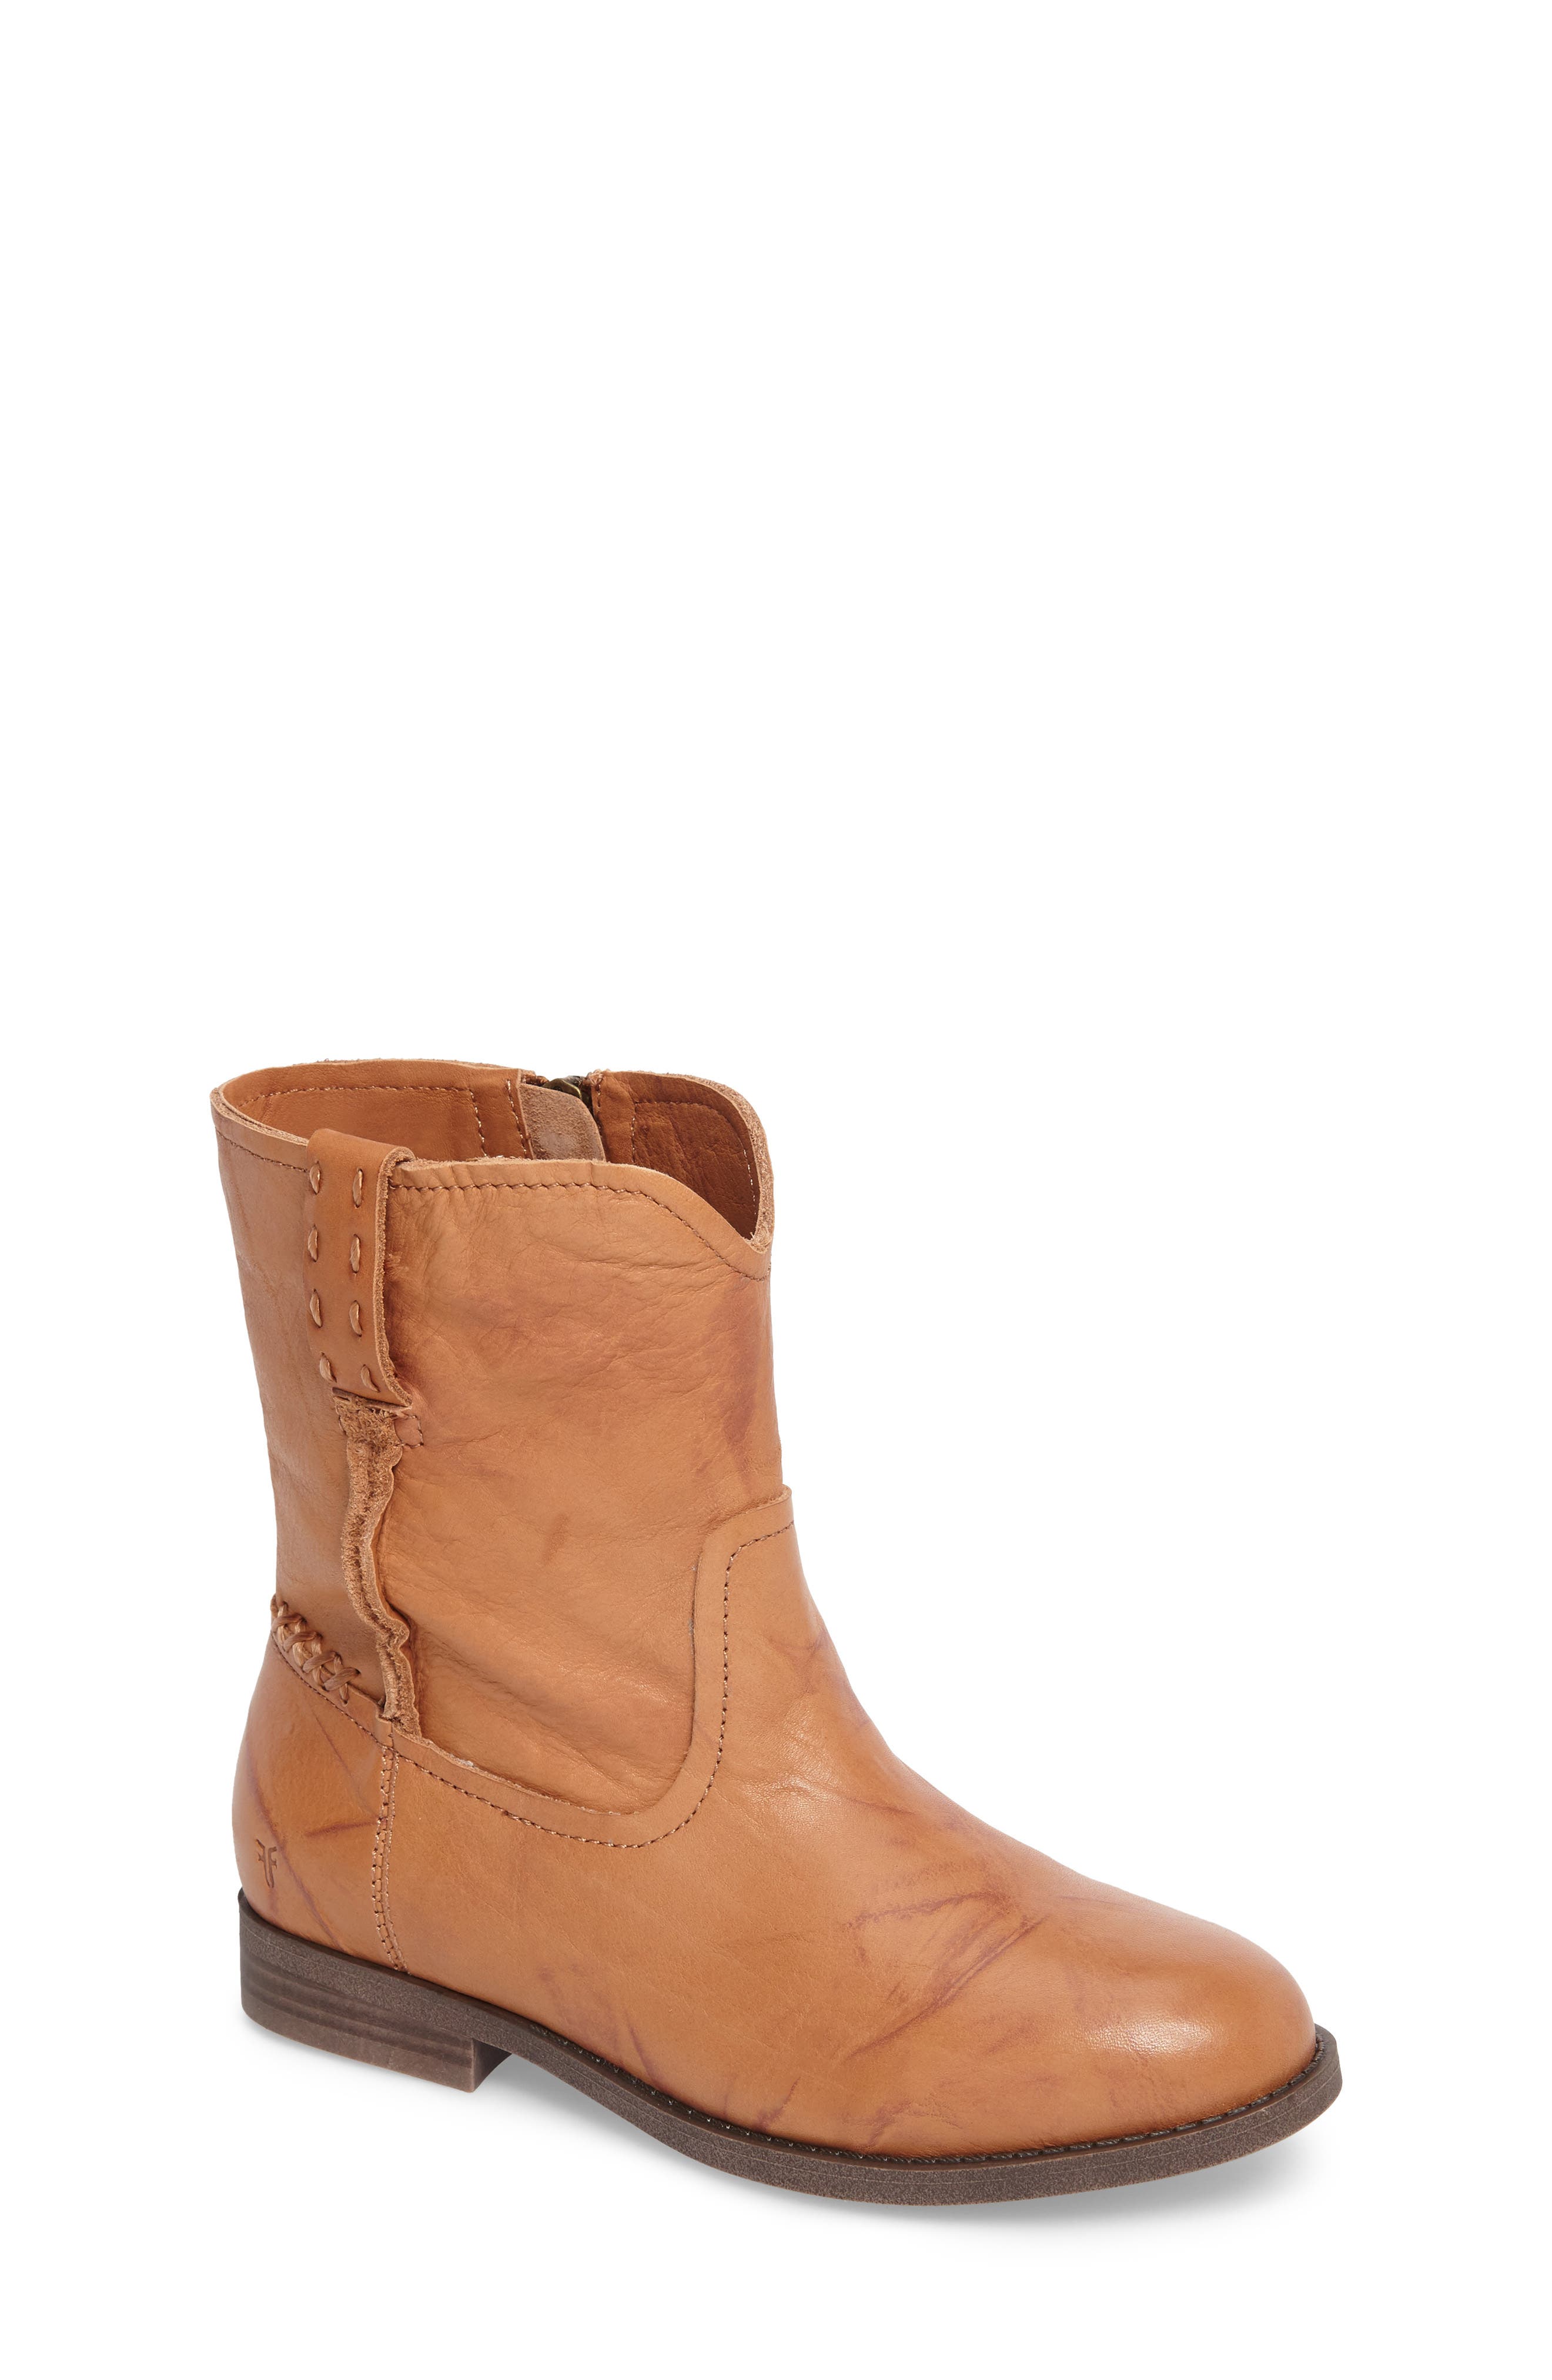 frye campus boots clearance